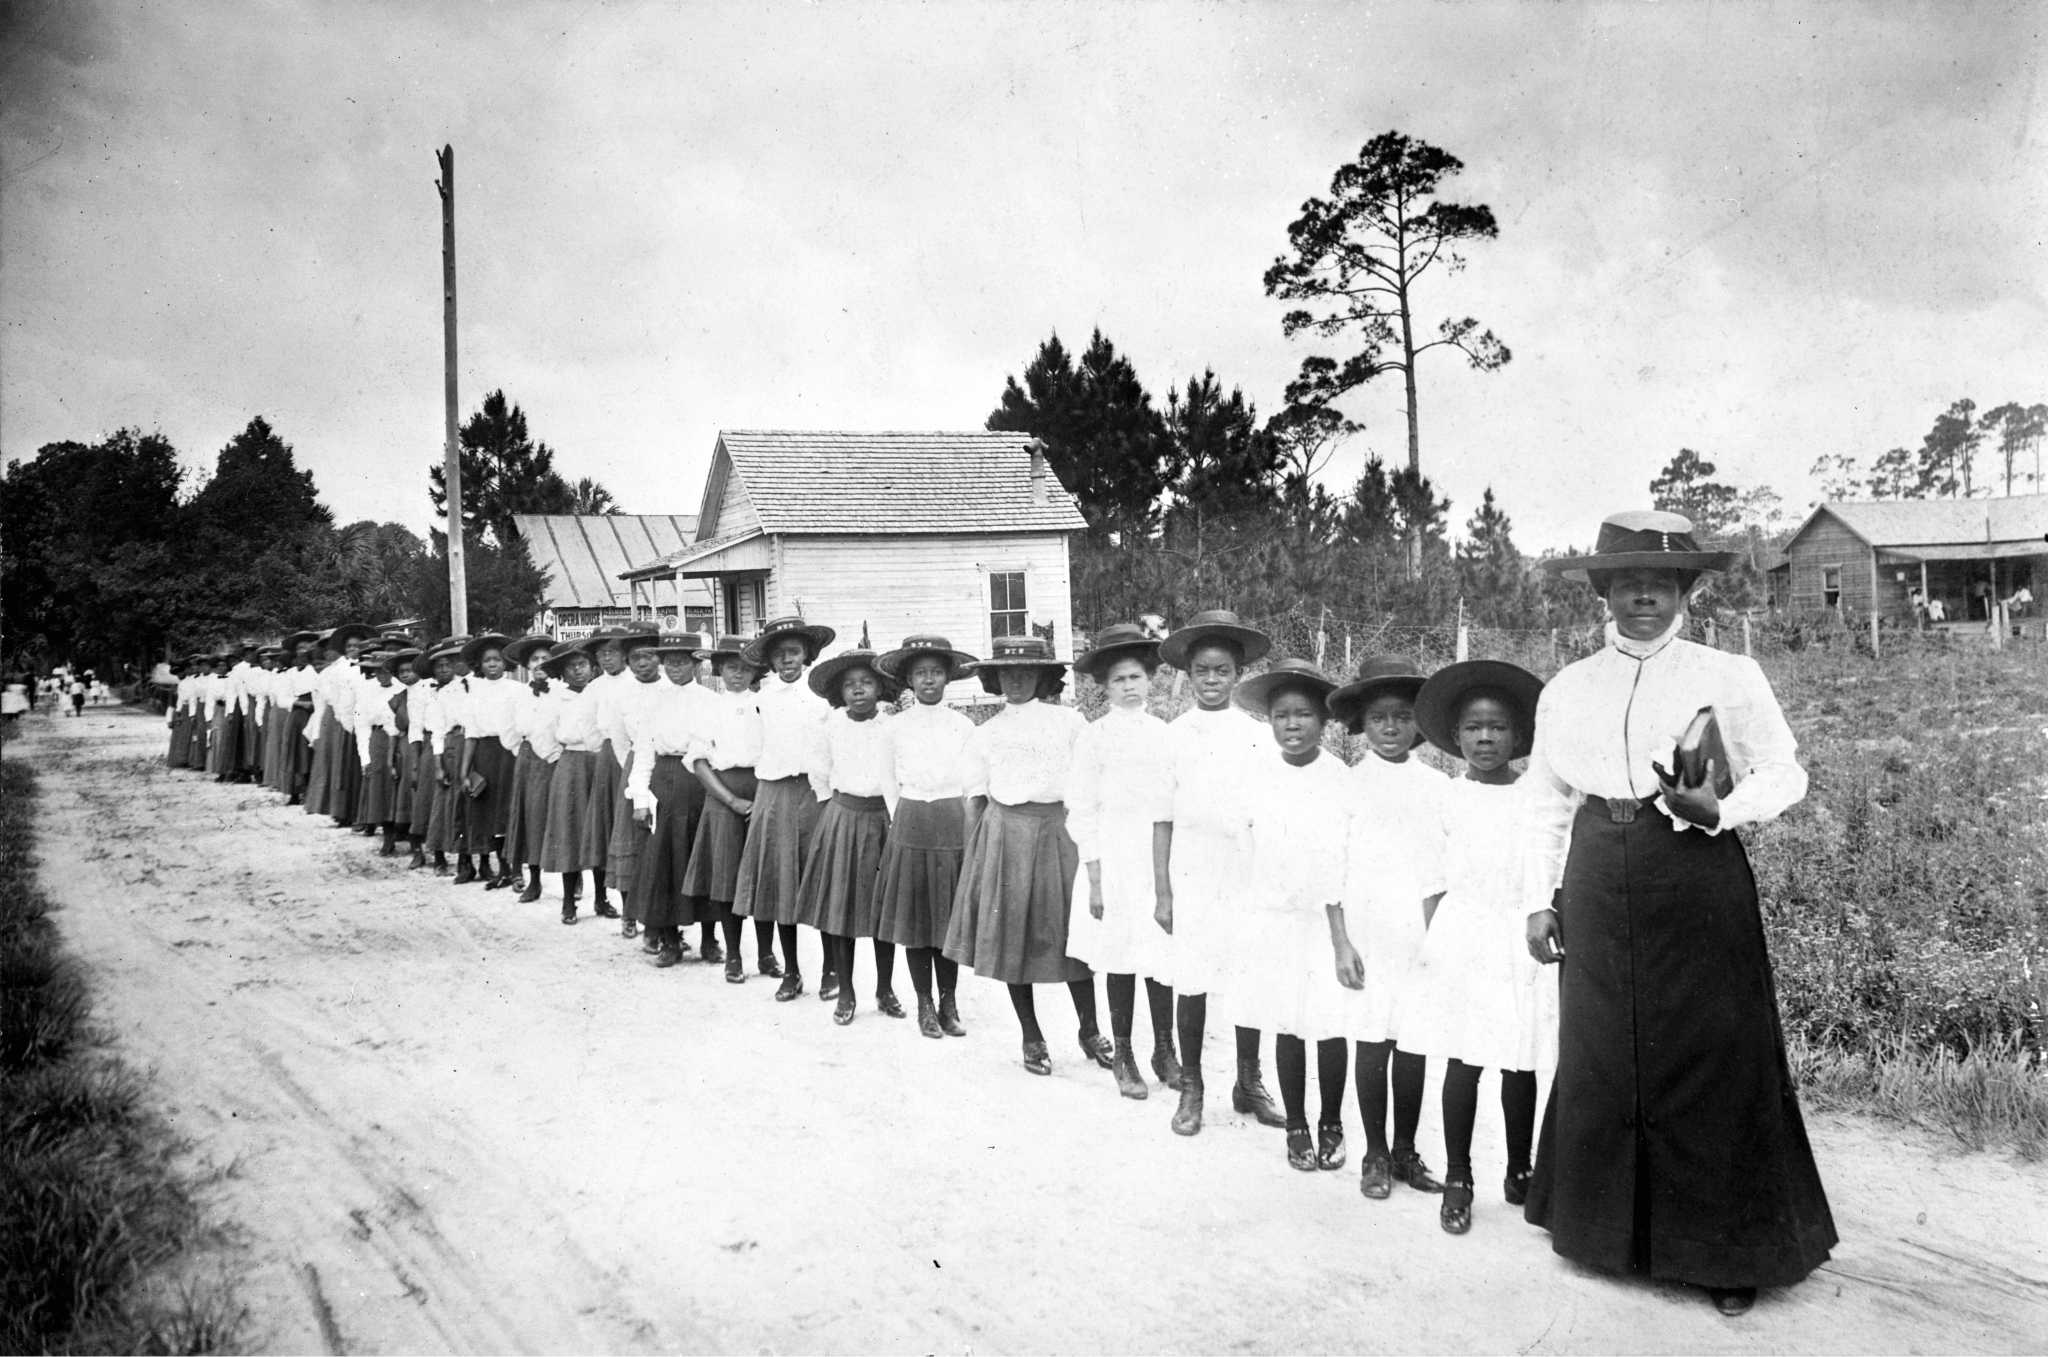 Photograph of Mary McLeod Bethune with students from the Daytona Institute